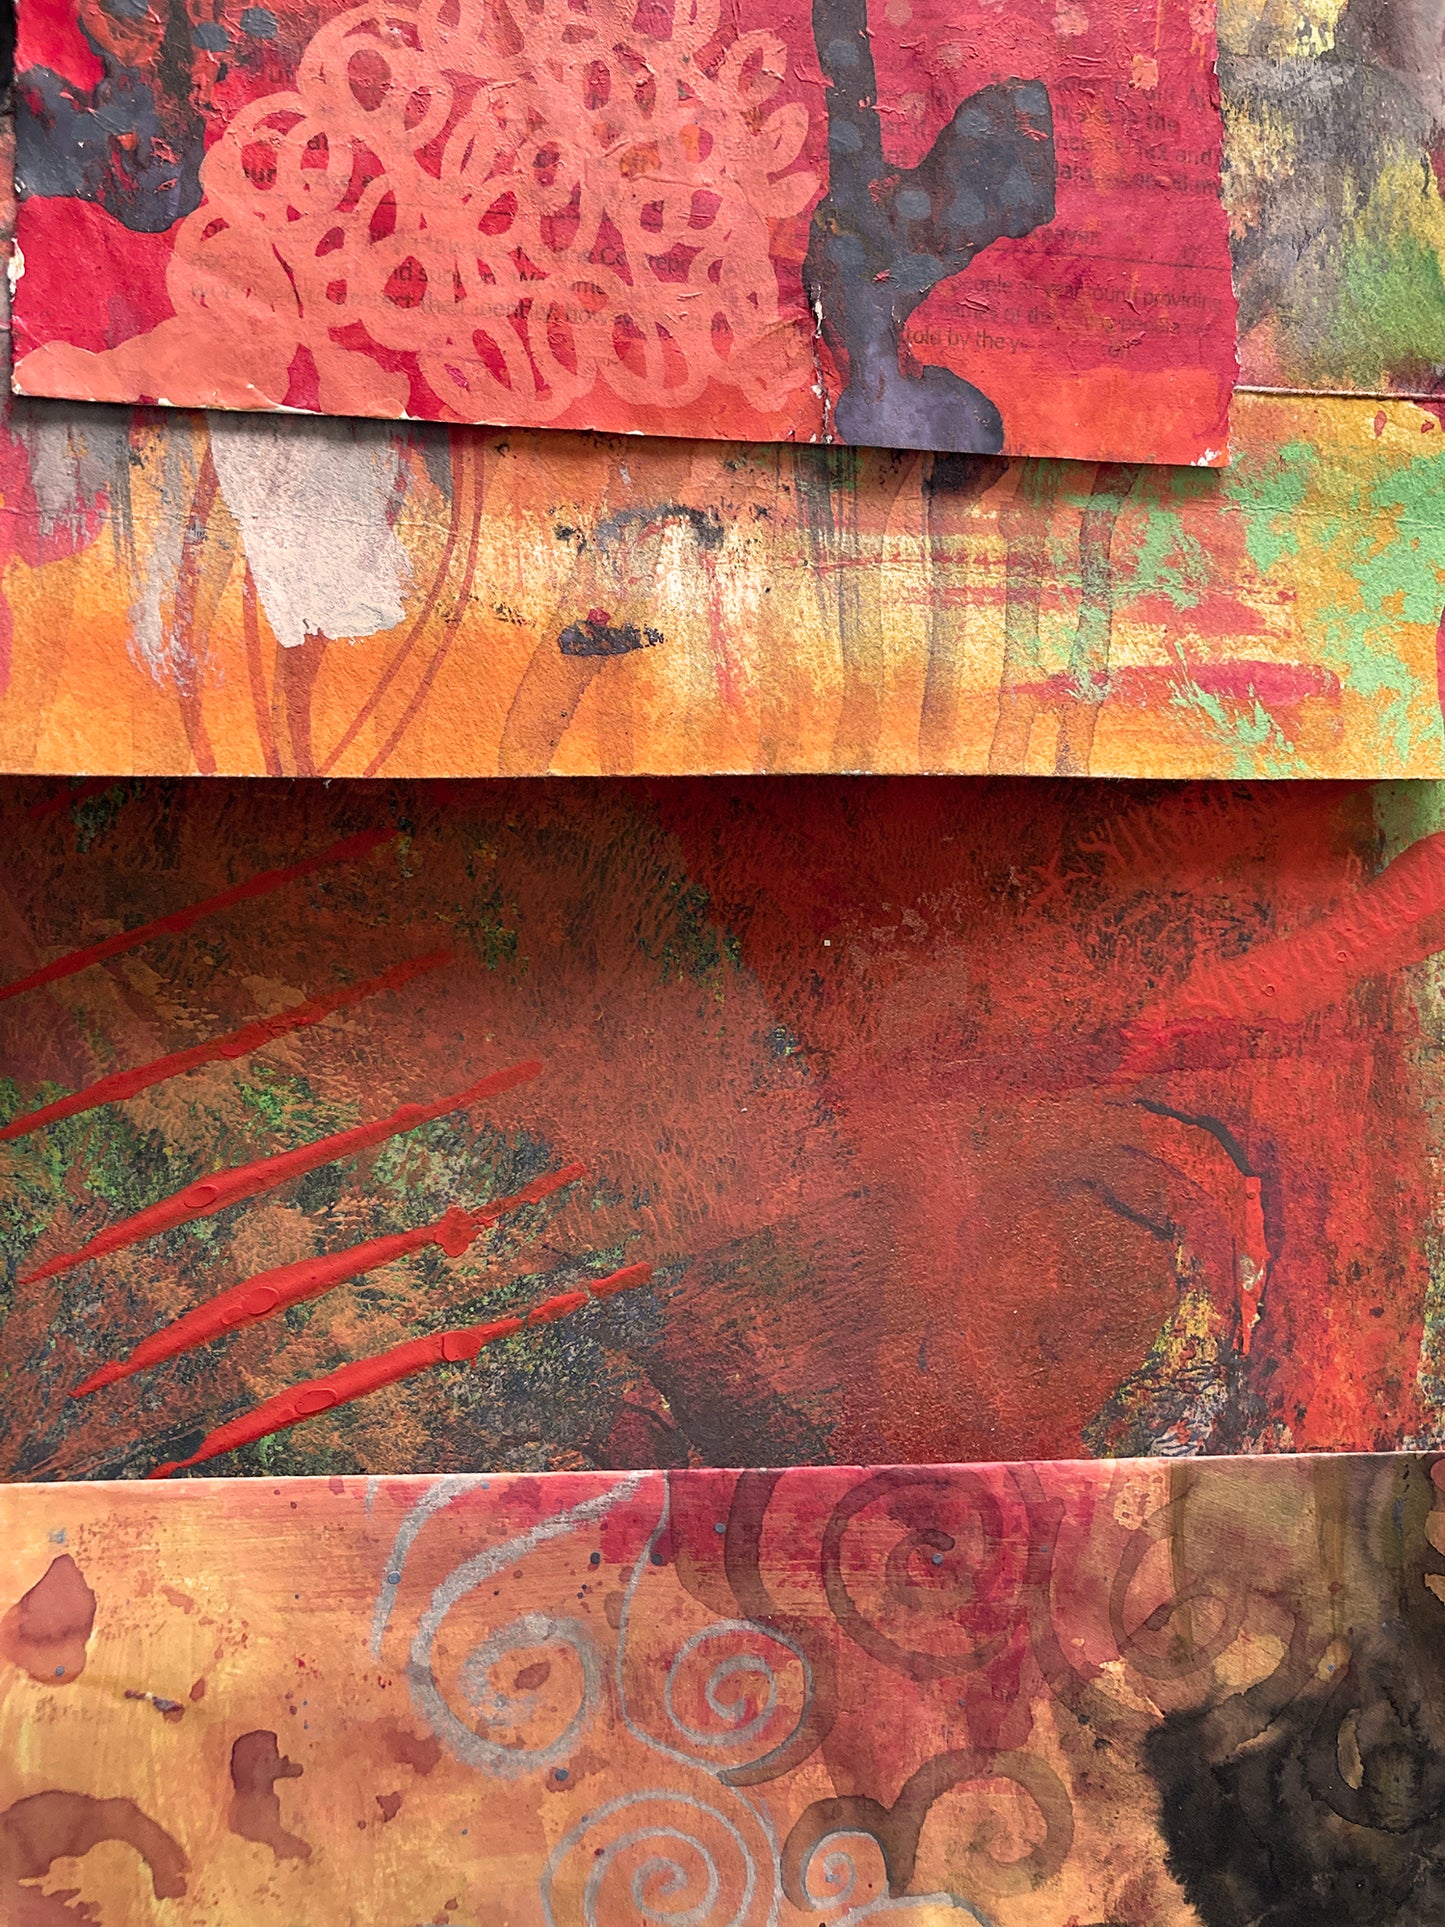 Painted Paper Bundles for Mixed Media Collage | "Terracotta Sandstone" |